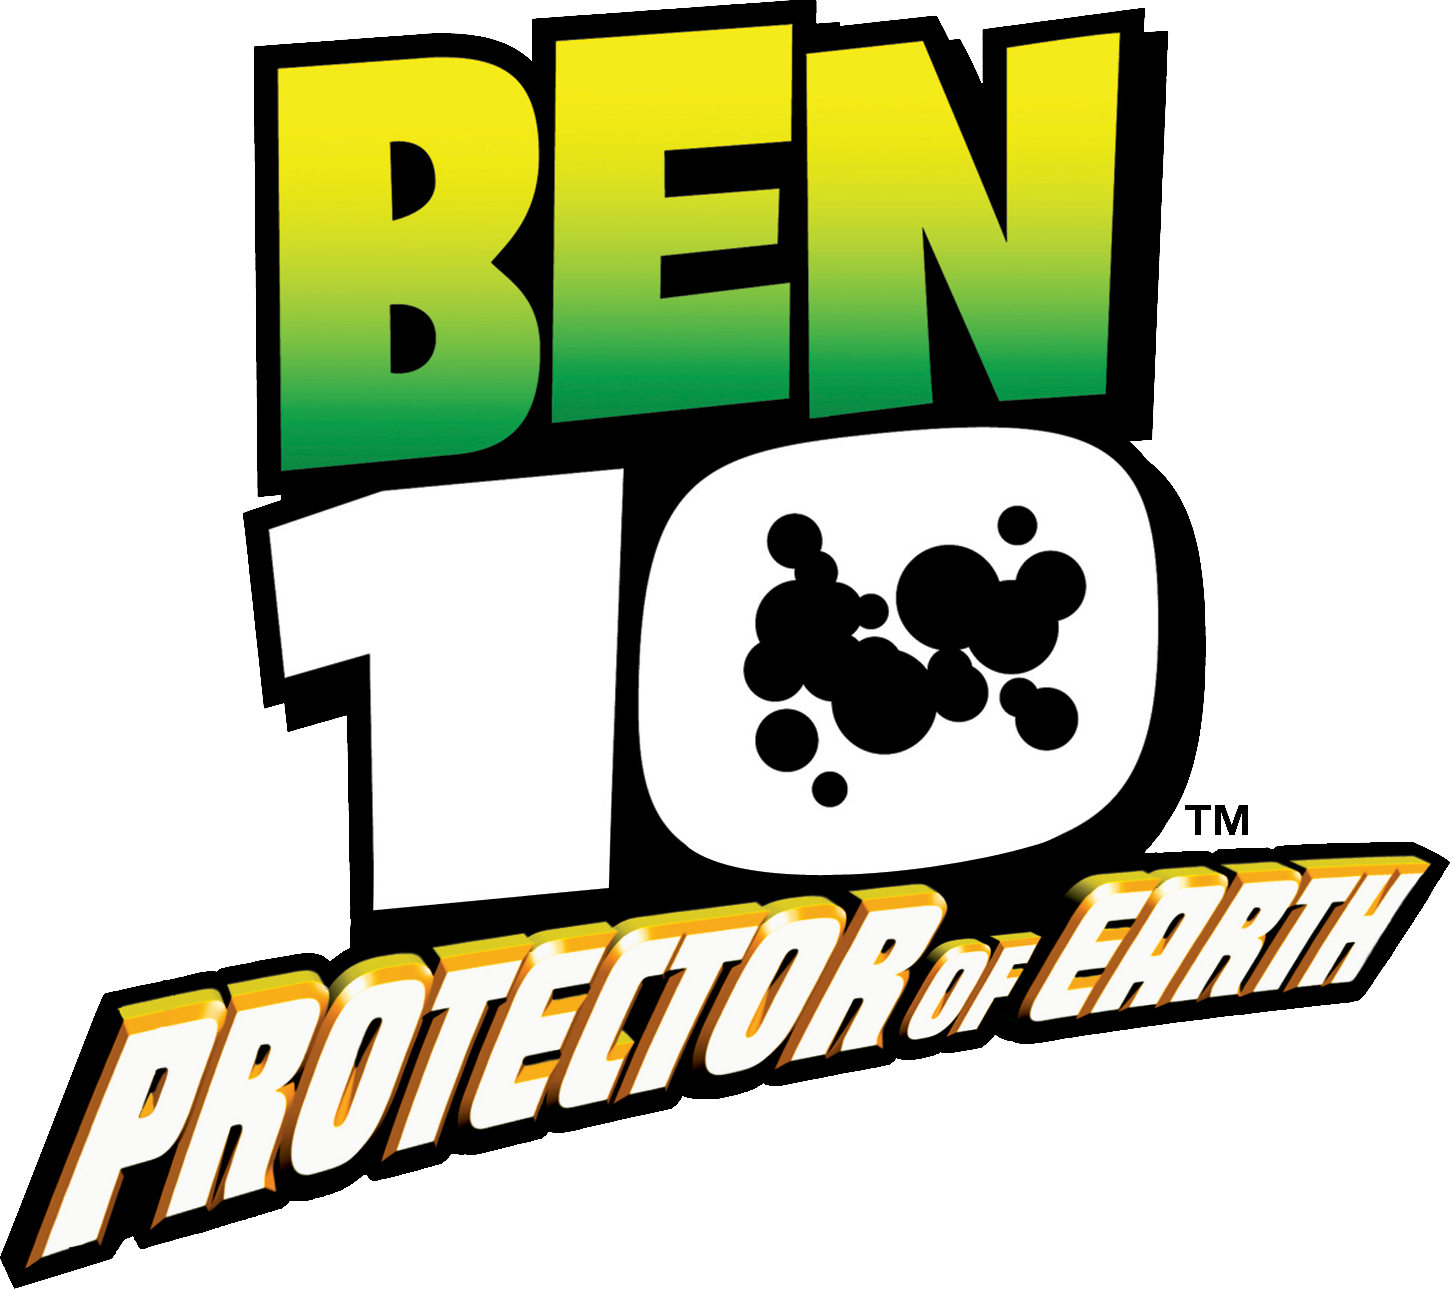 Ben 10 (partially found pitch pilot of Cartoon Network animated series;  early-mid 2000s) - The Lost Media Wiki